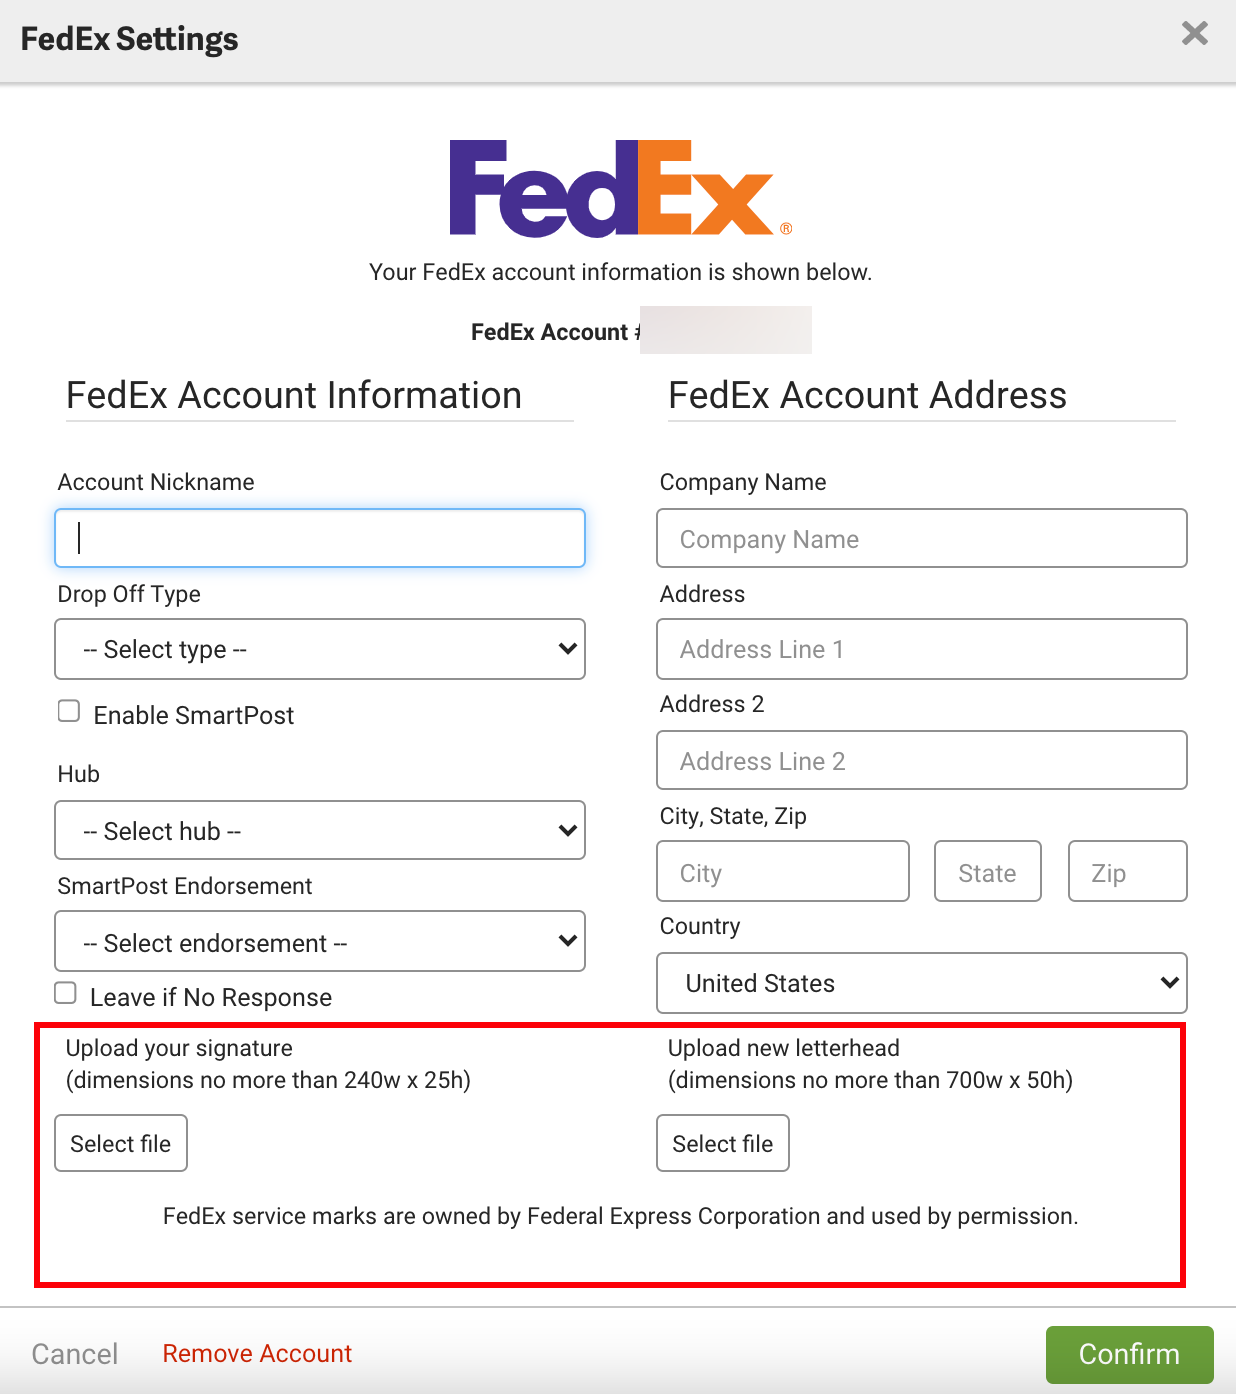 FedEx settings popup with the Upload signature and Upload letterhead section outlined